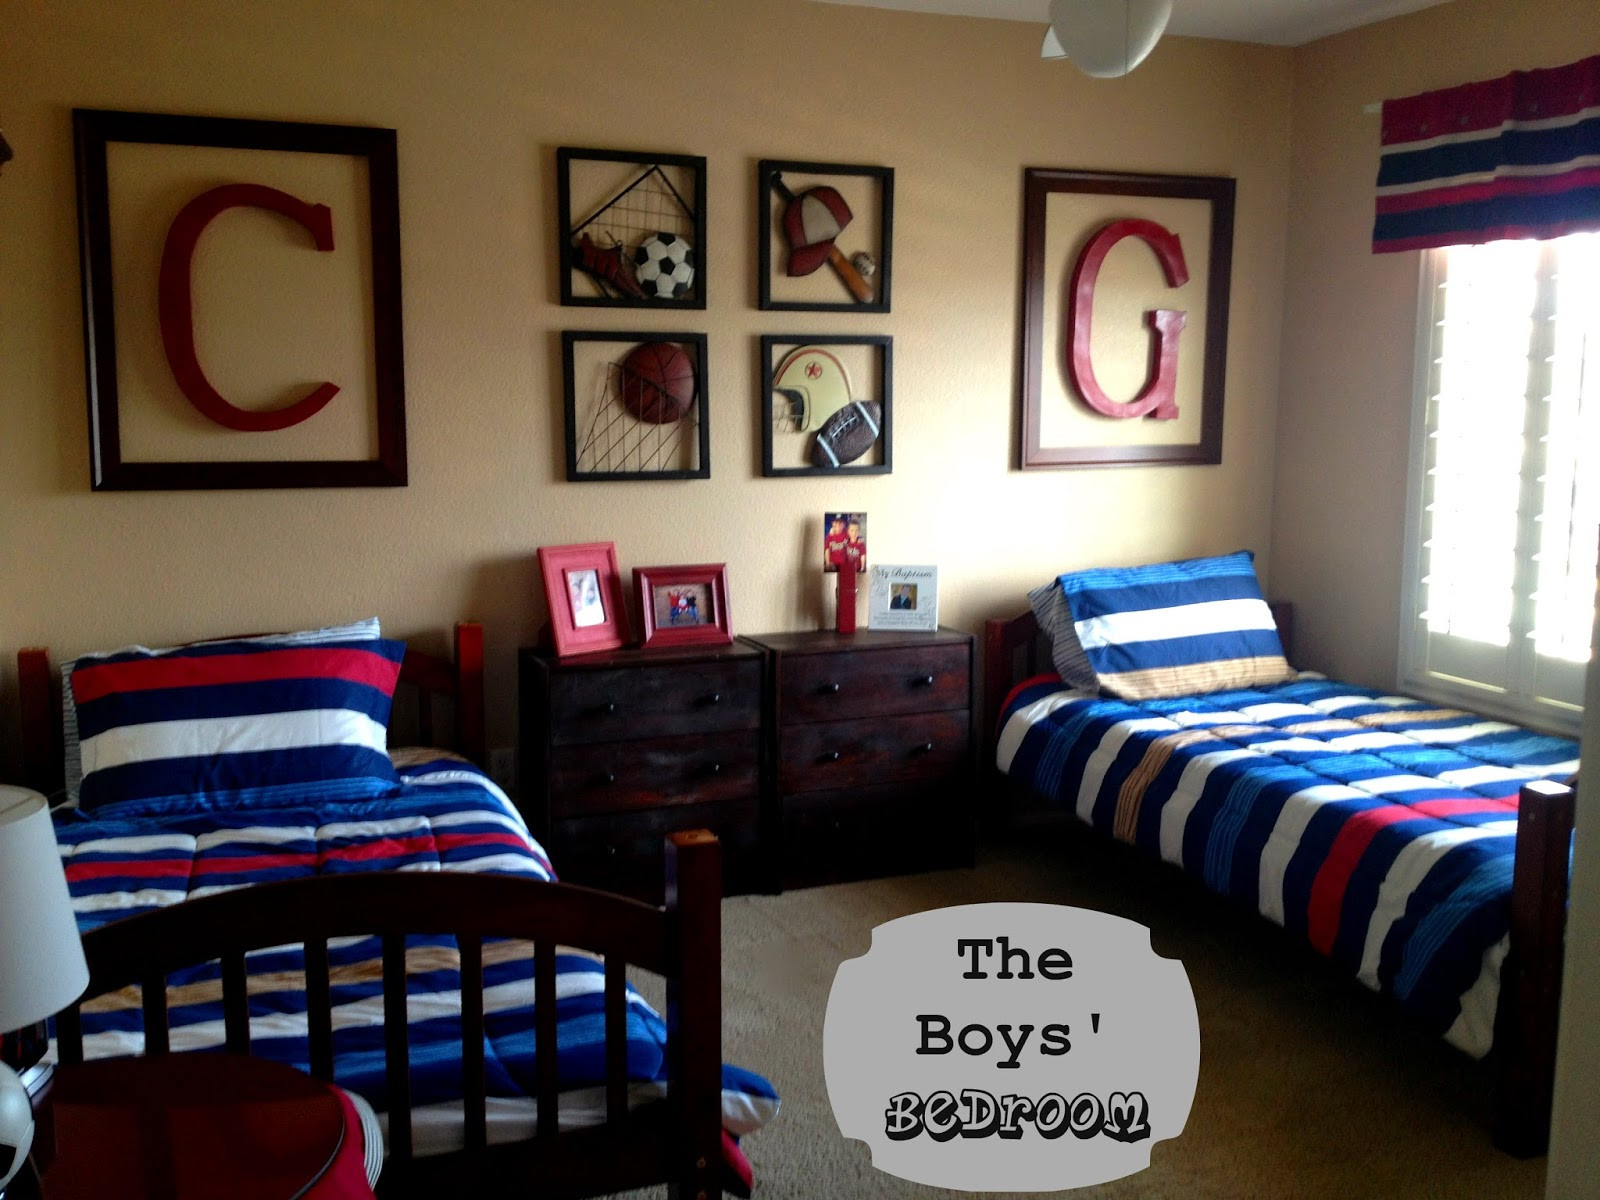 Kids Sports Room Decorations
 Marci Coombs The Boys Sports Themed Bedroom